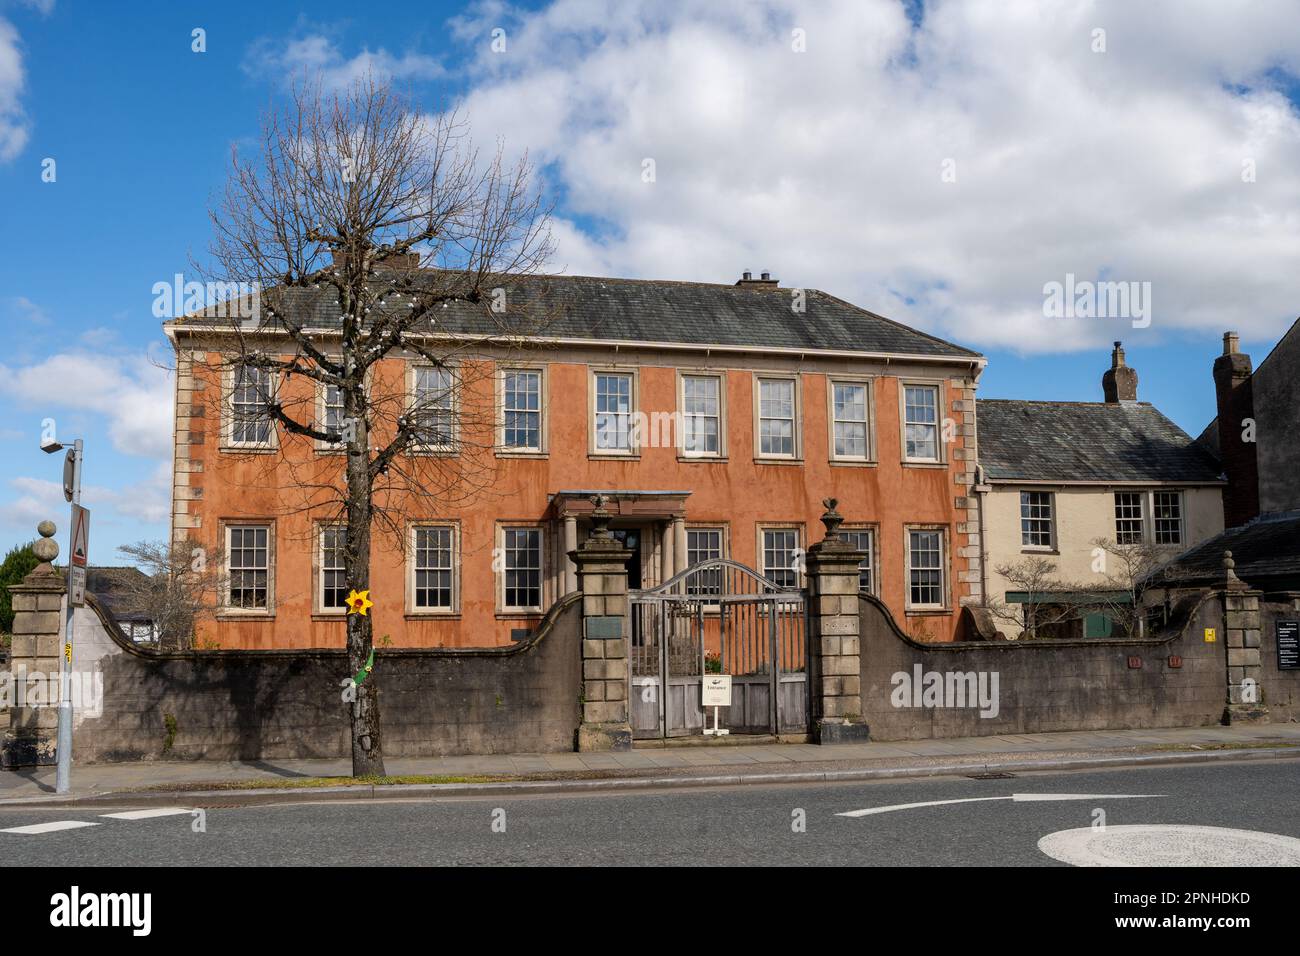 Wordsworth House in the town of Cockermouth, Cumberland, UK, childhood home of the famous lake poet William Wordsworth and his diarist sister Dorothy. Stock Photo